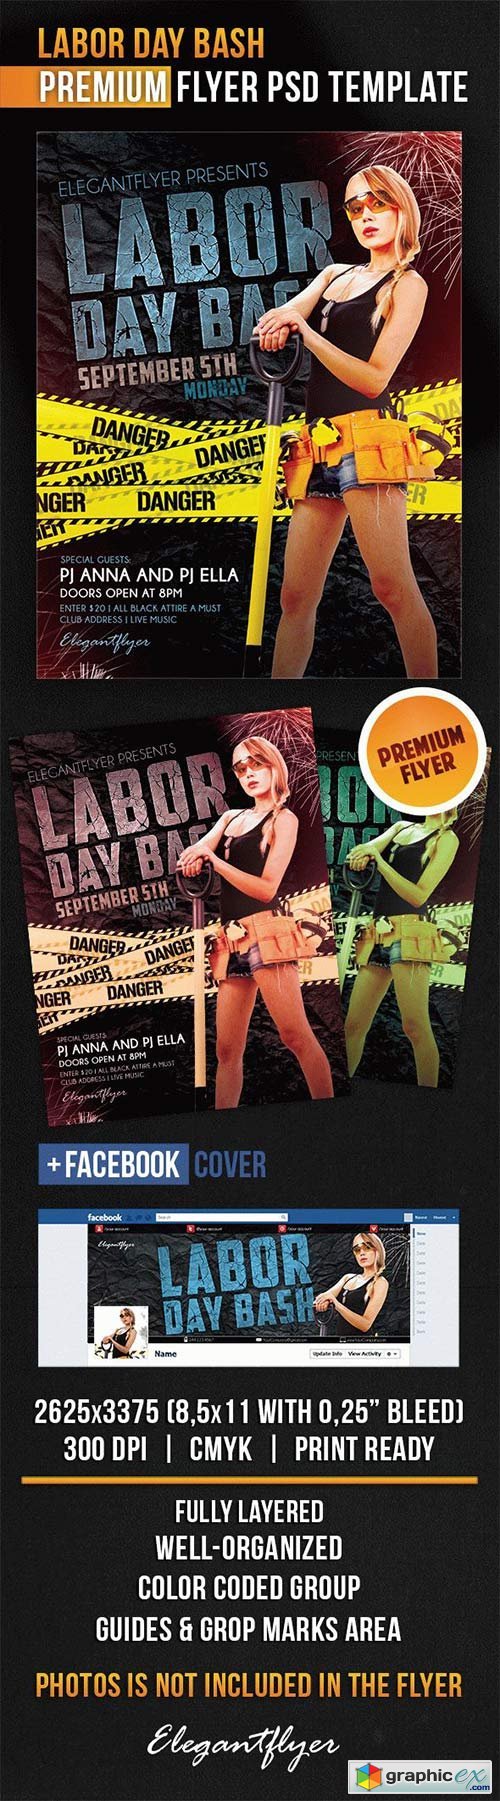 Labor Day Bash  Flyer PSD Template + Facebook Cover